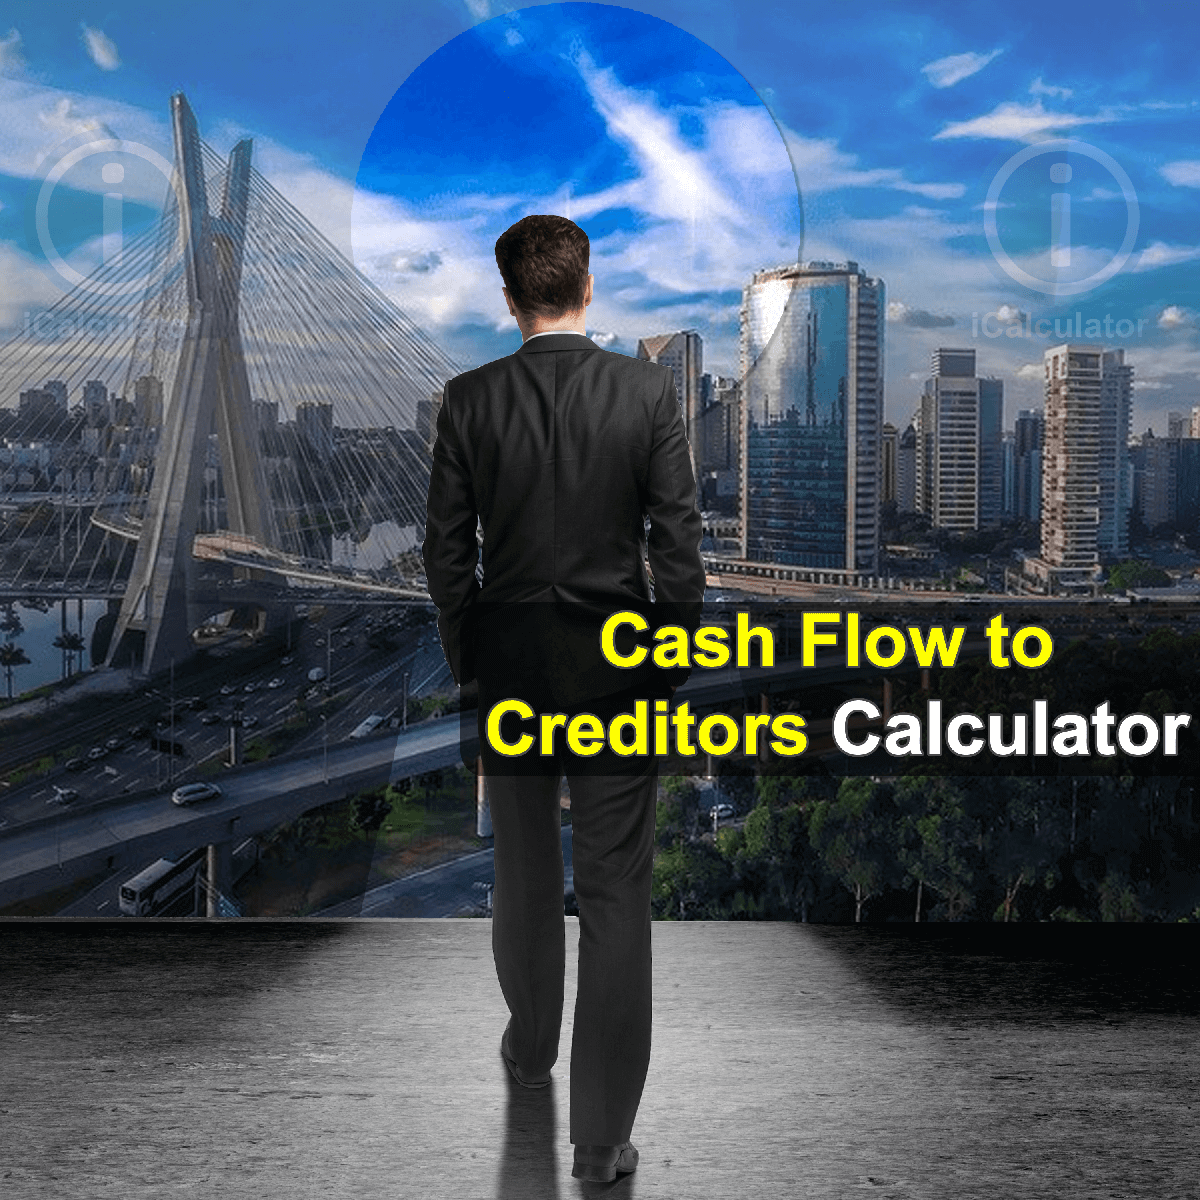 Cash Flow to Creditors Calculator. This image provides details of how to calculate cash flow to creditors using a calculator, pen and notepad. By using the cash flow formula, the Cash Flow to Creditors Calculator provides a true calculation of the net amount of cash and cash-equivalents going in and out of a business